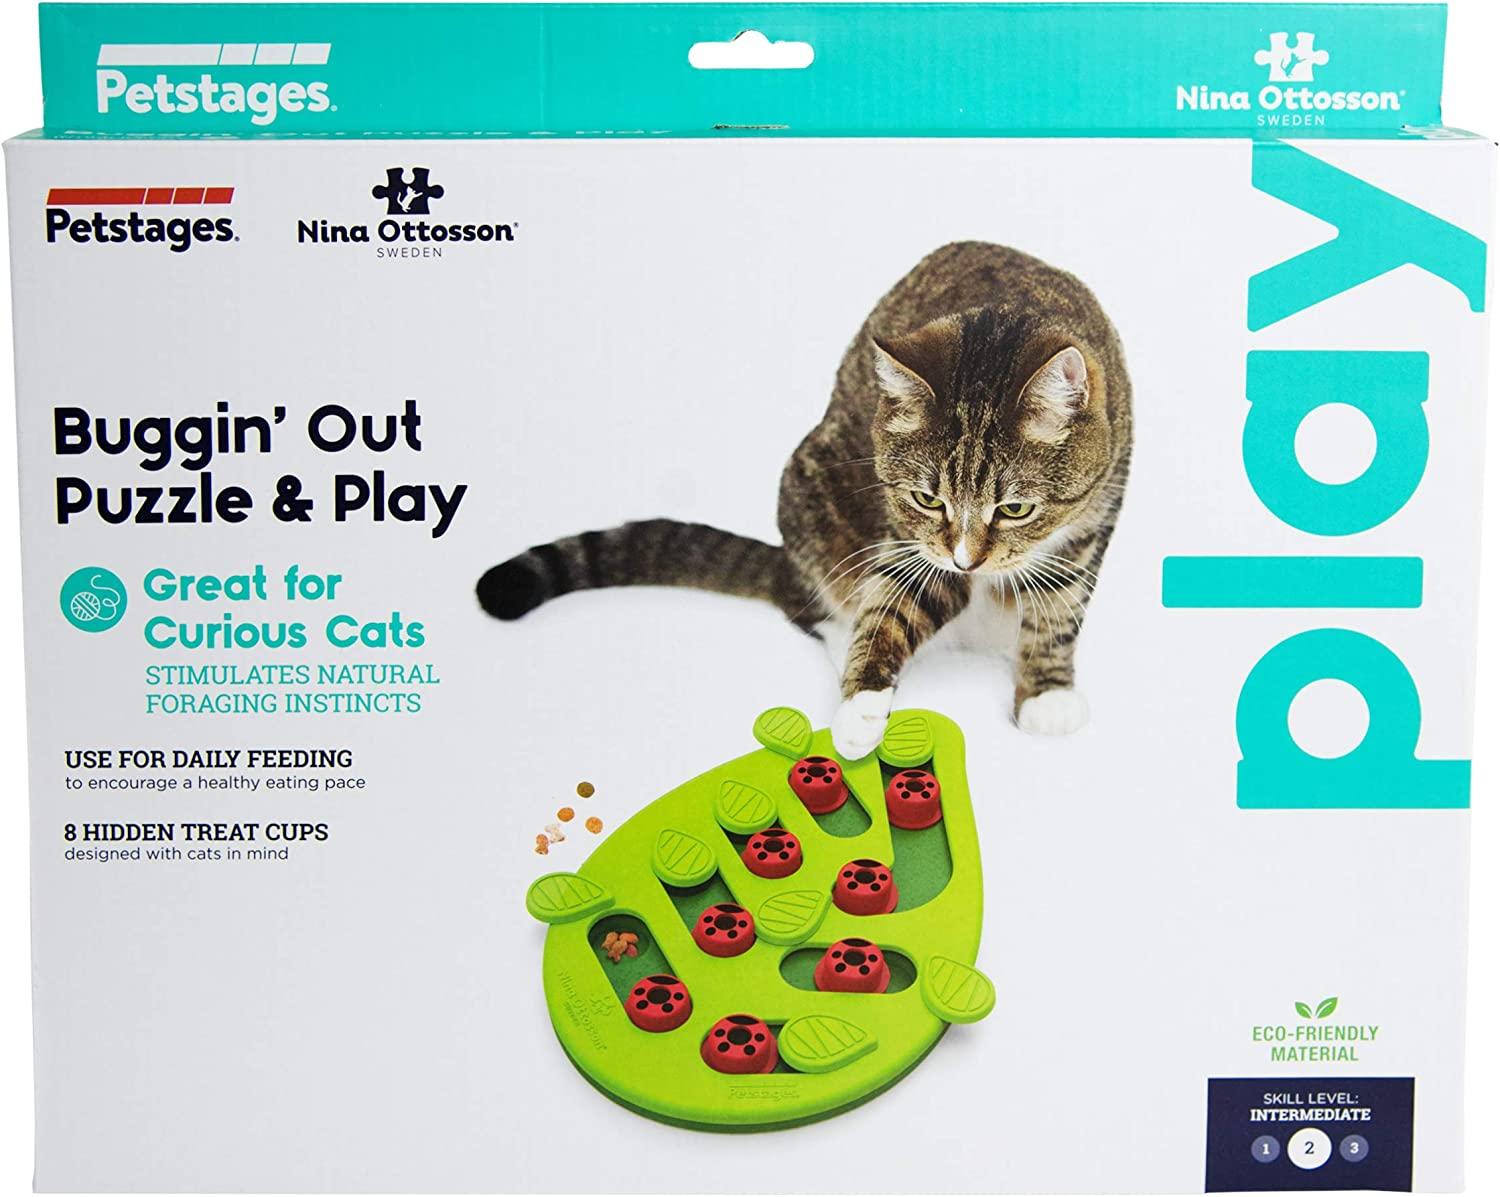 Cat and DOG Chat With Caren: Challenge your Pet with the 2 in 1 Dog Treat  Puzzle & Chew Toy by Uahpet!